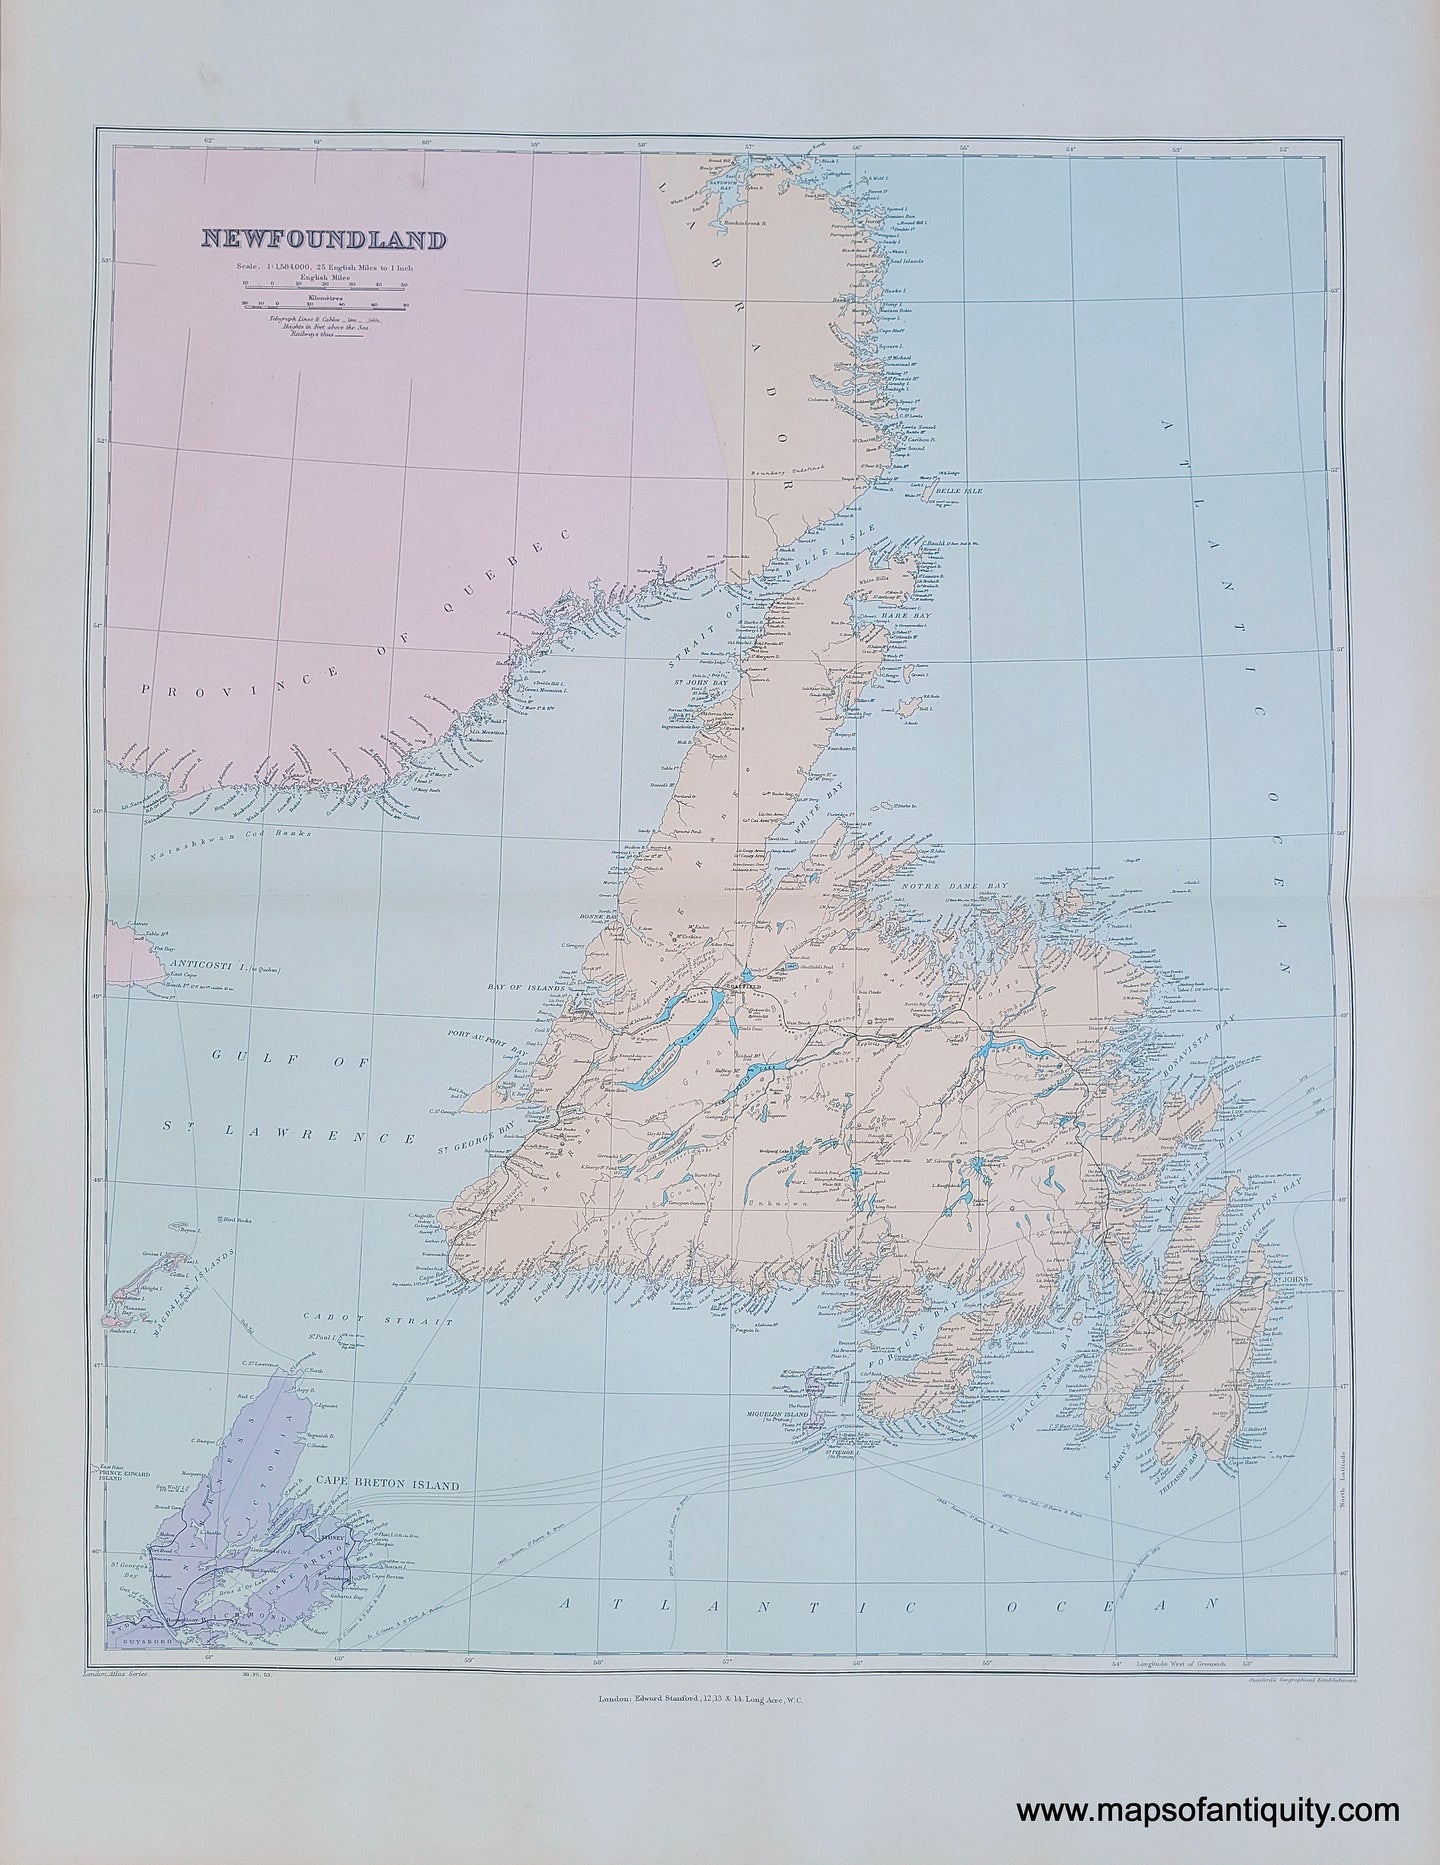 Printed-Color-Antique-Map-Newfoundland-1904-Stanford-1900s-20th-century-Maps-of-Antiquity